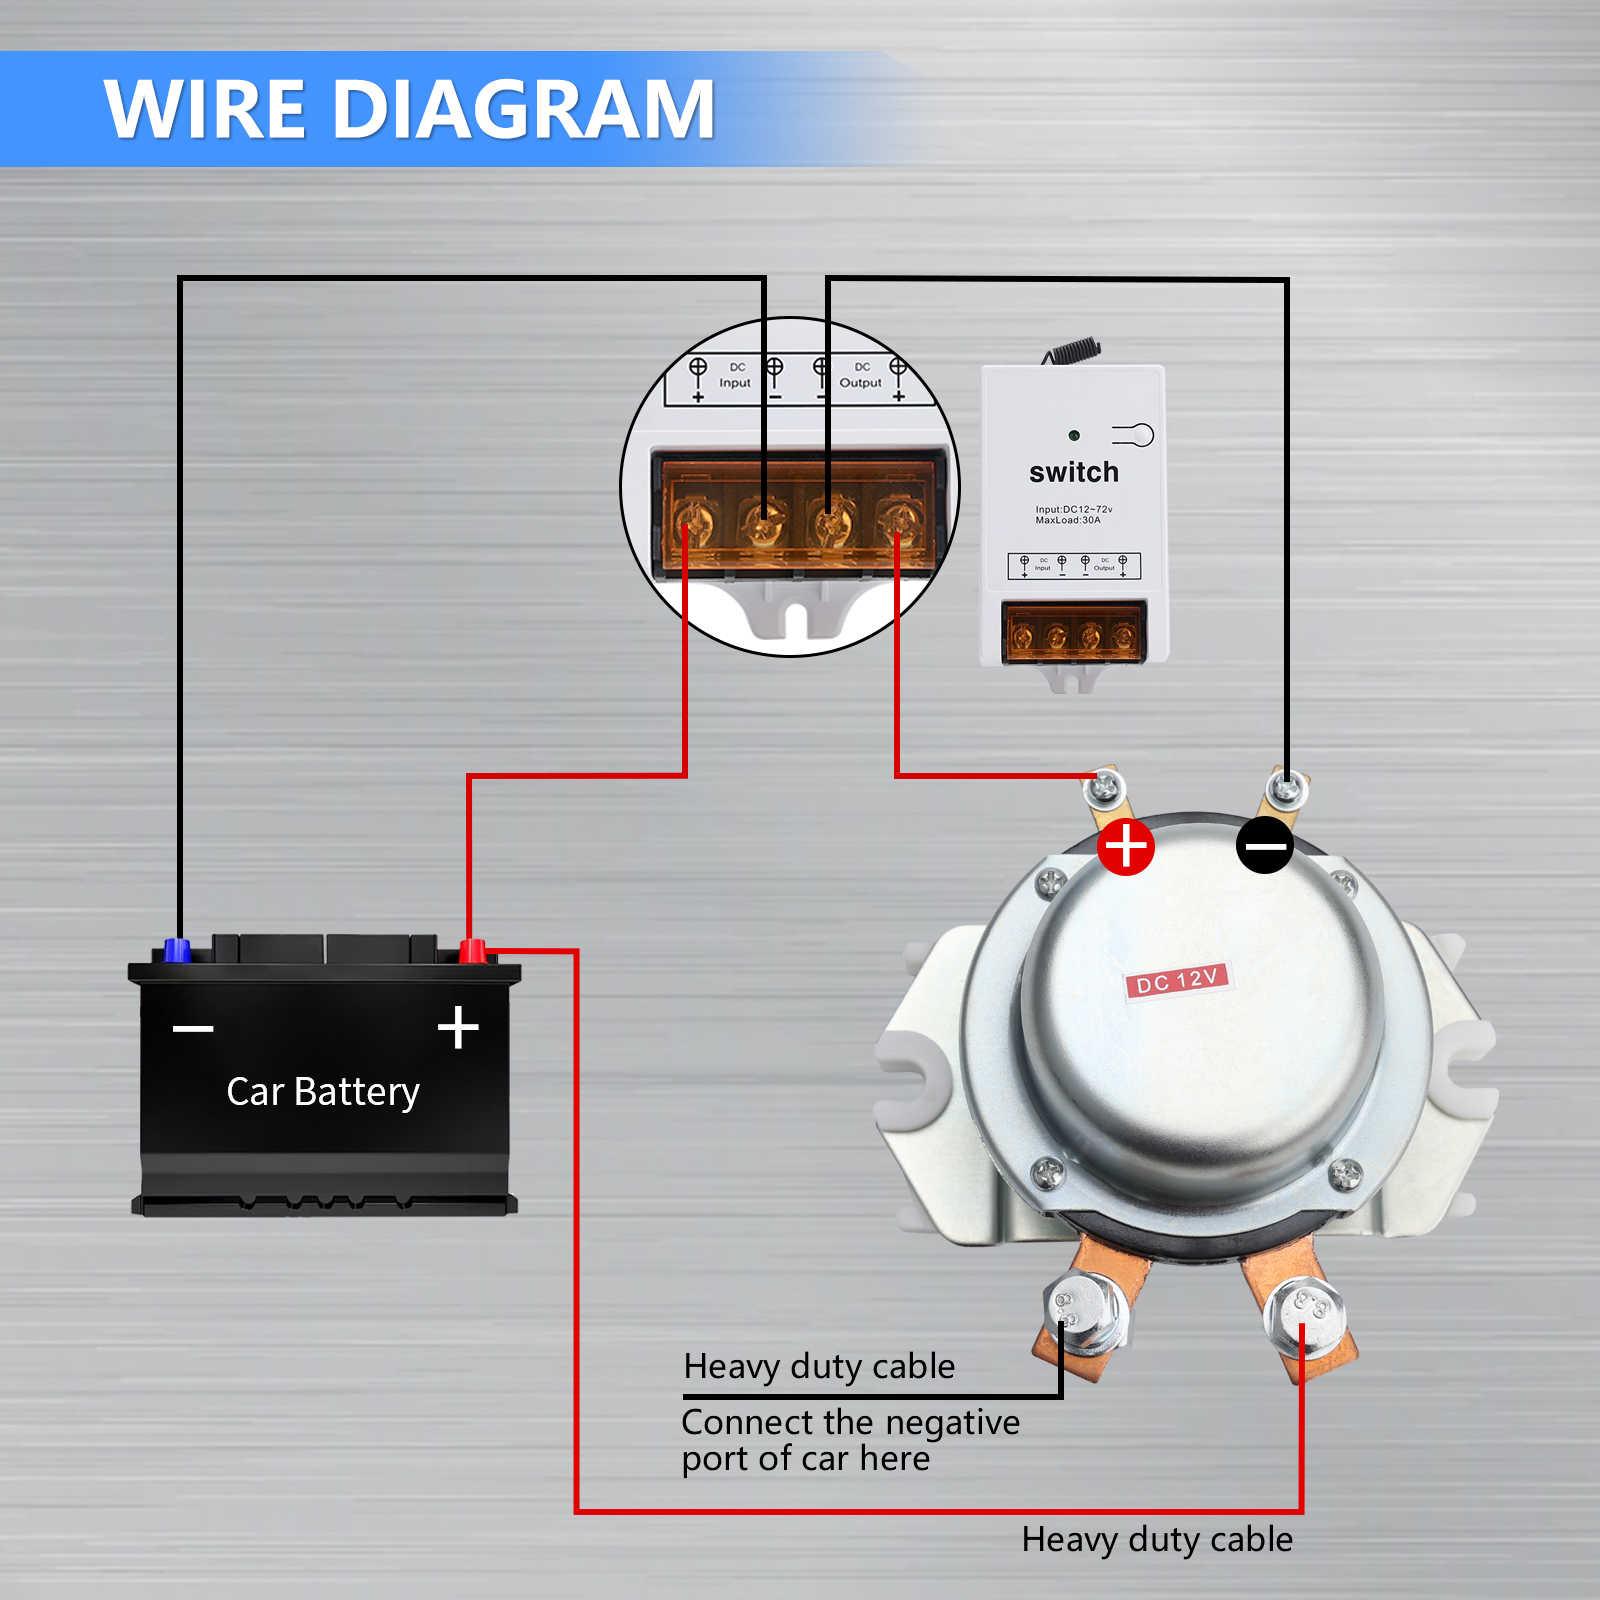 Car Wireless Remote Control Battery Disconnect Switch-MaySpare